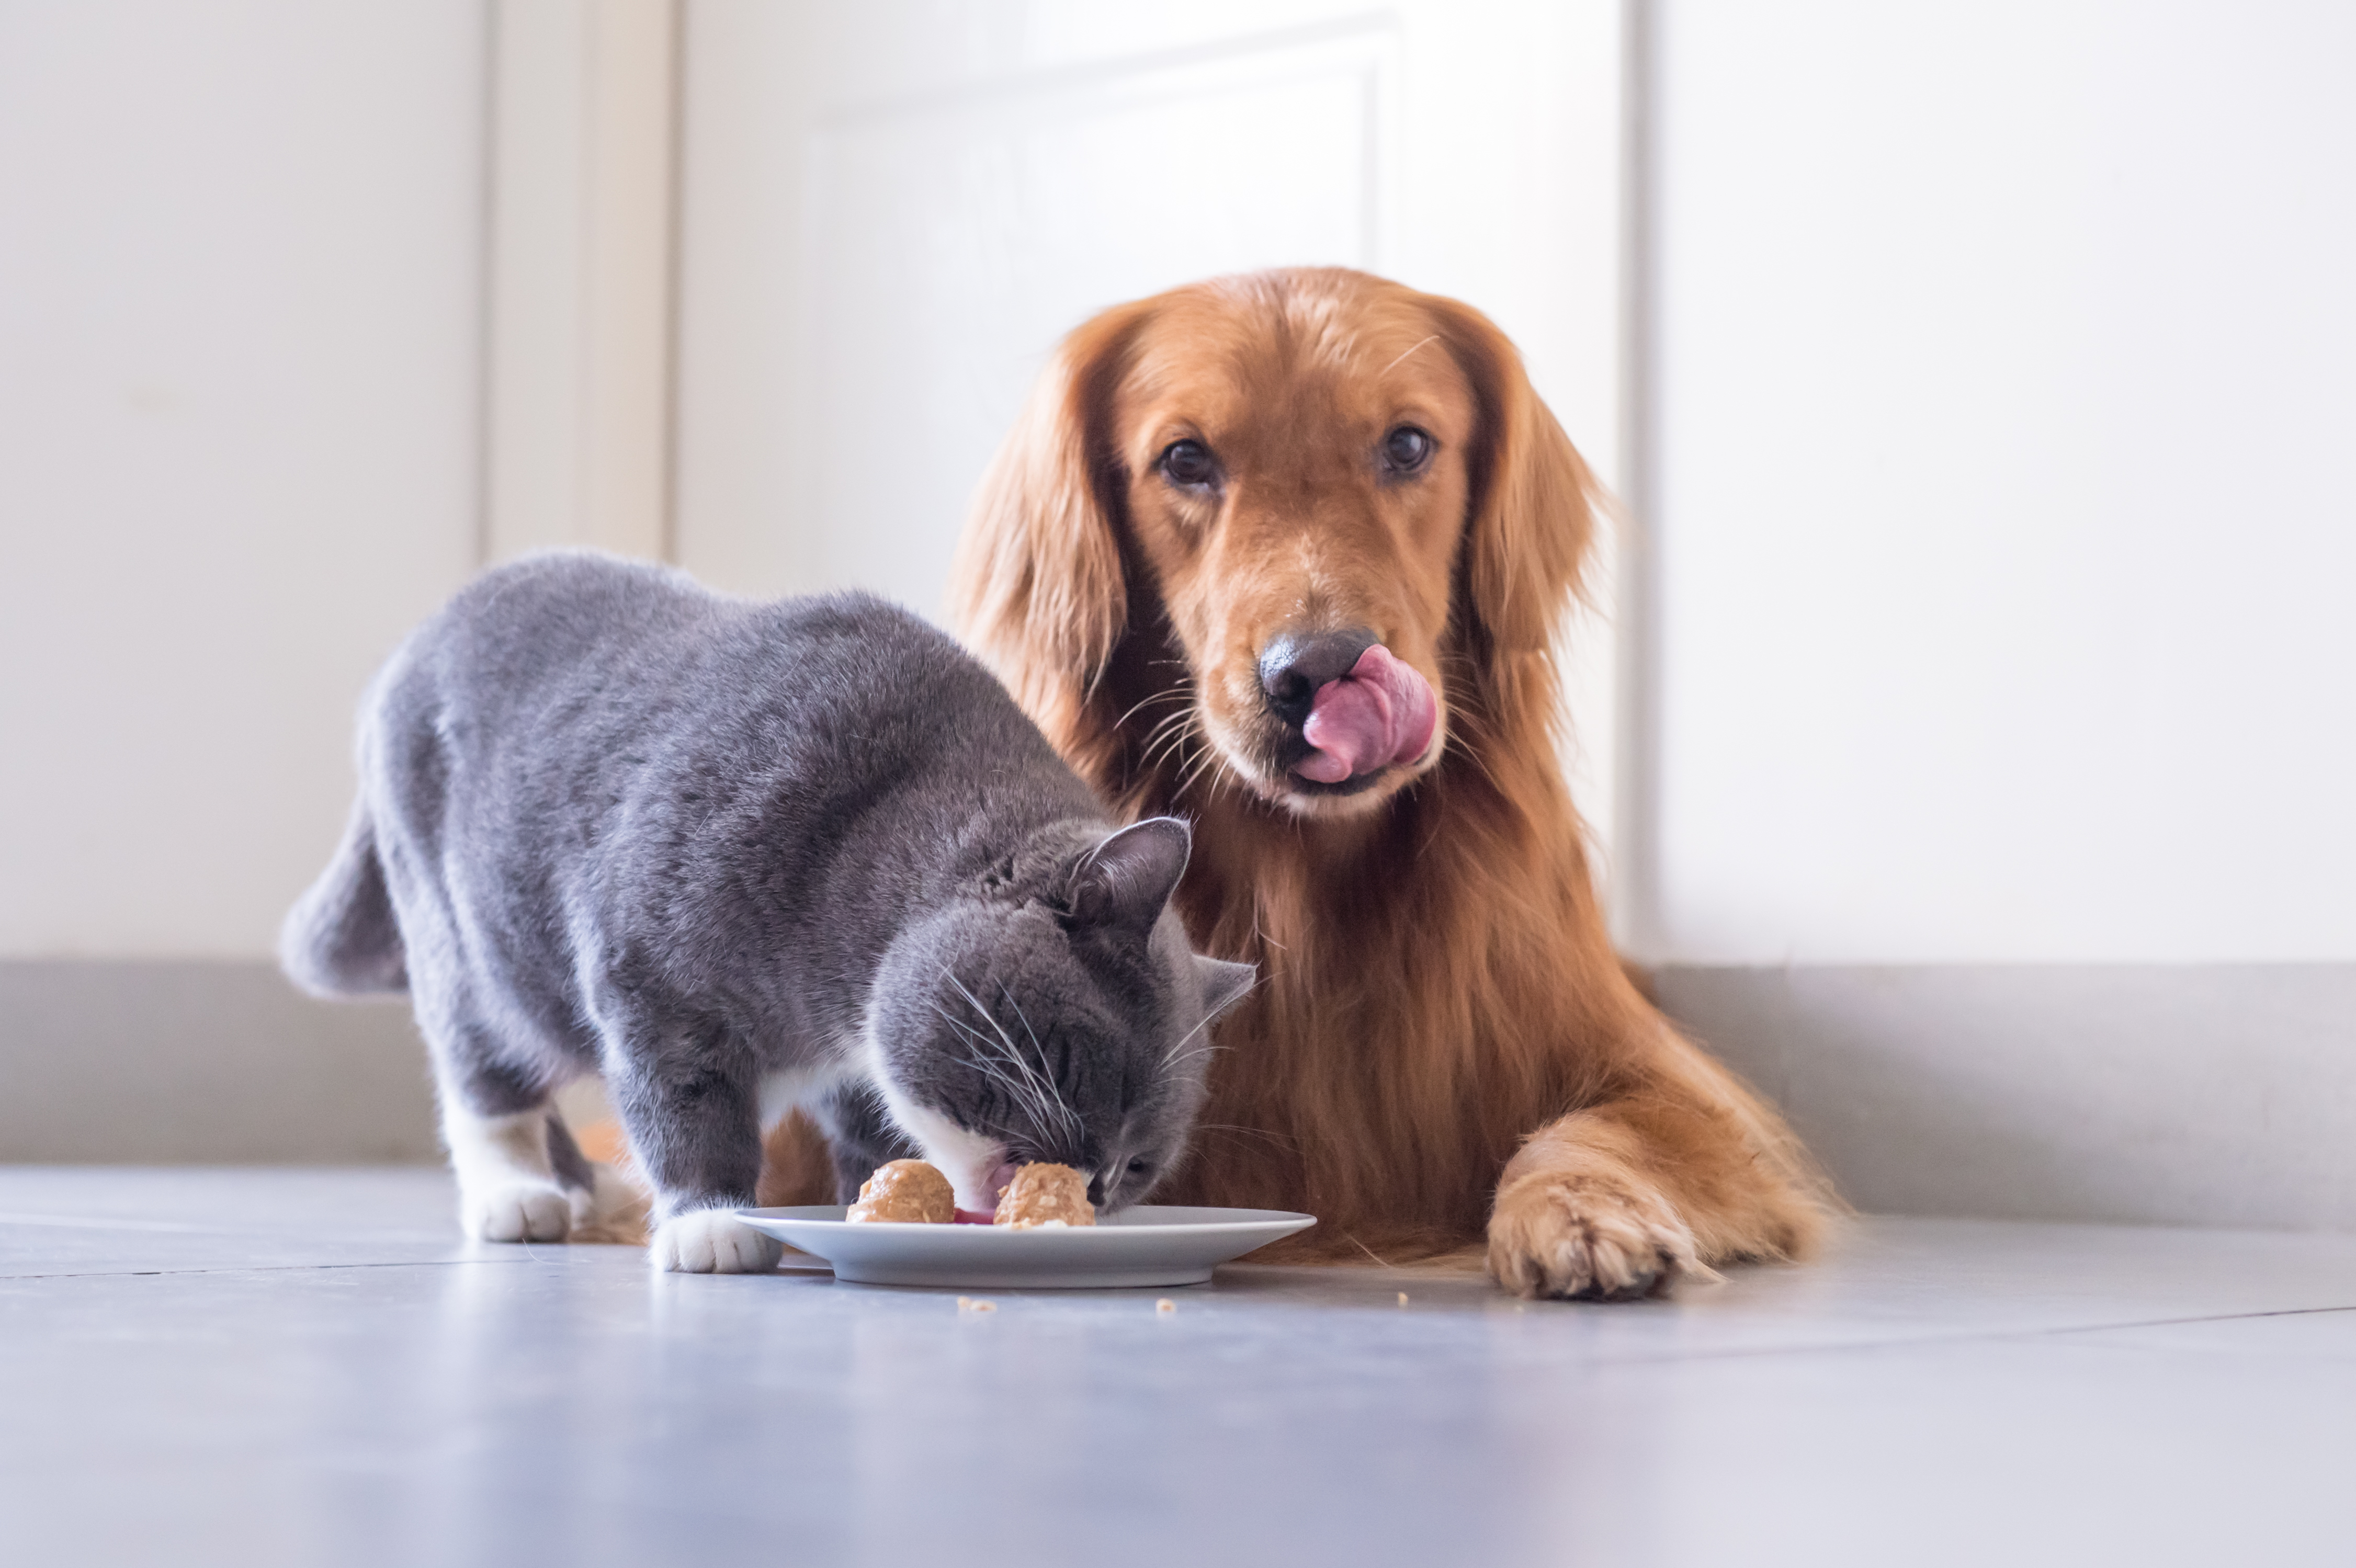 Picky pet prescription: What to do when your pet won’t eat her prescribed therapeutic diet